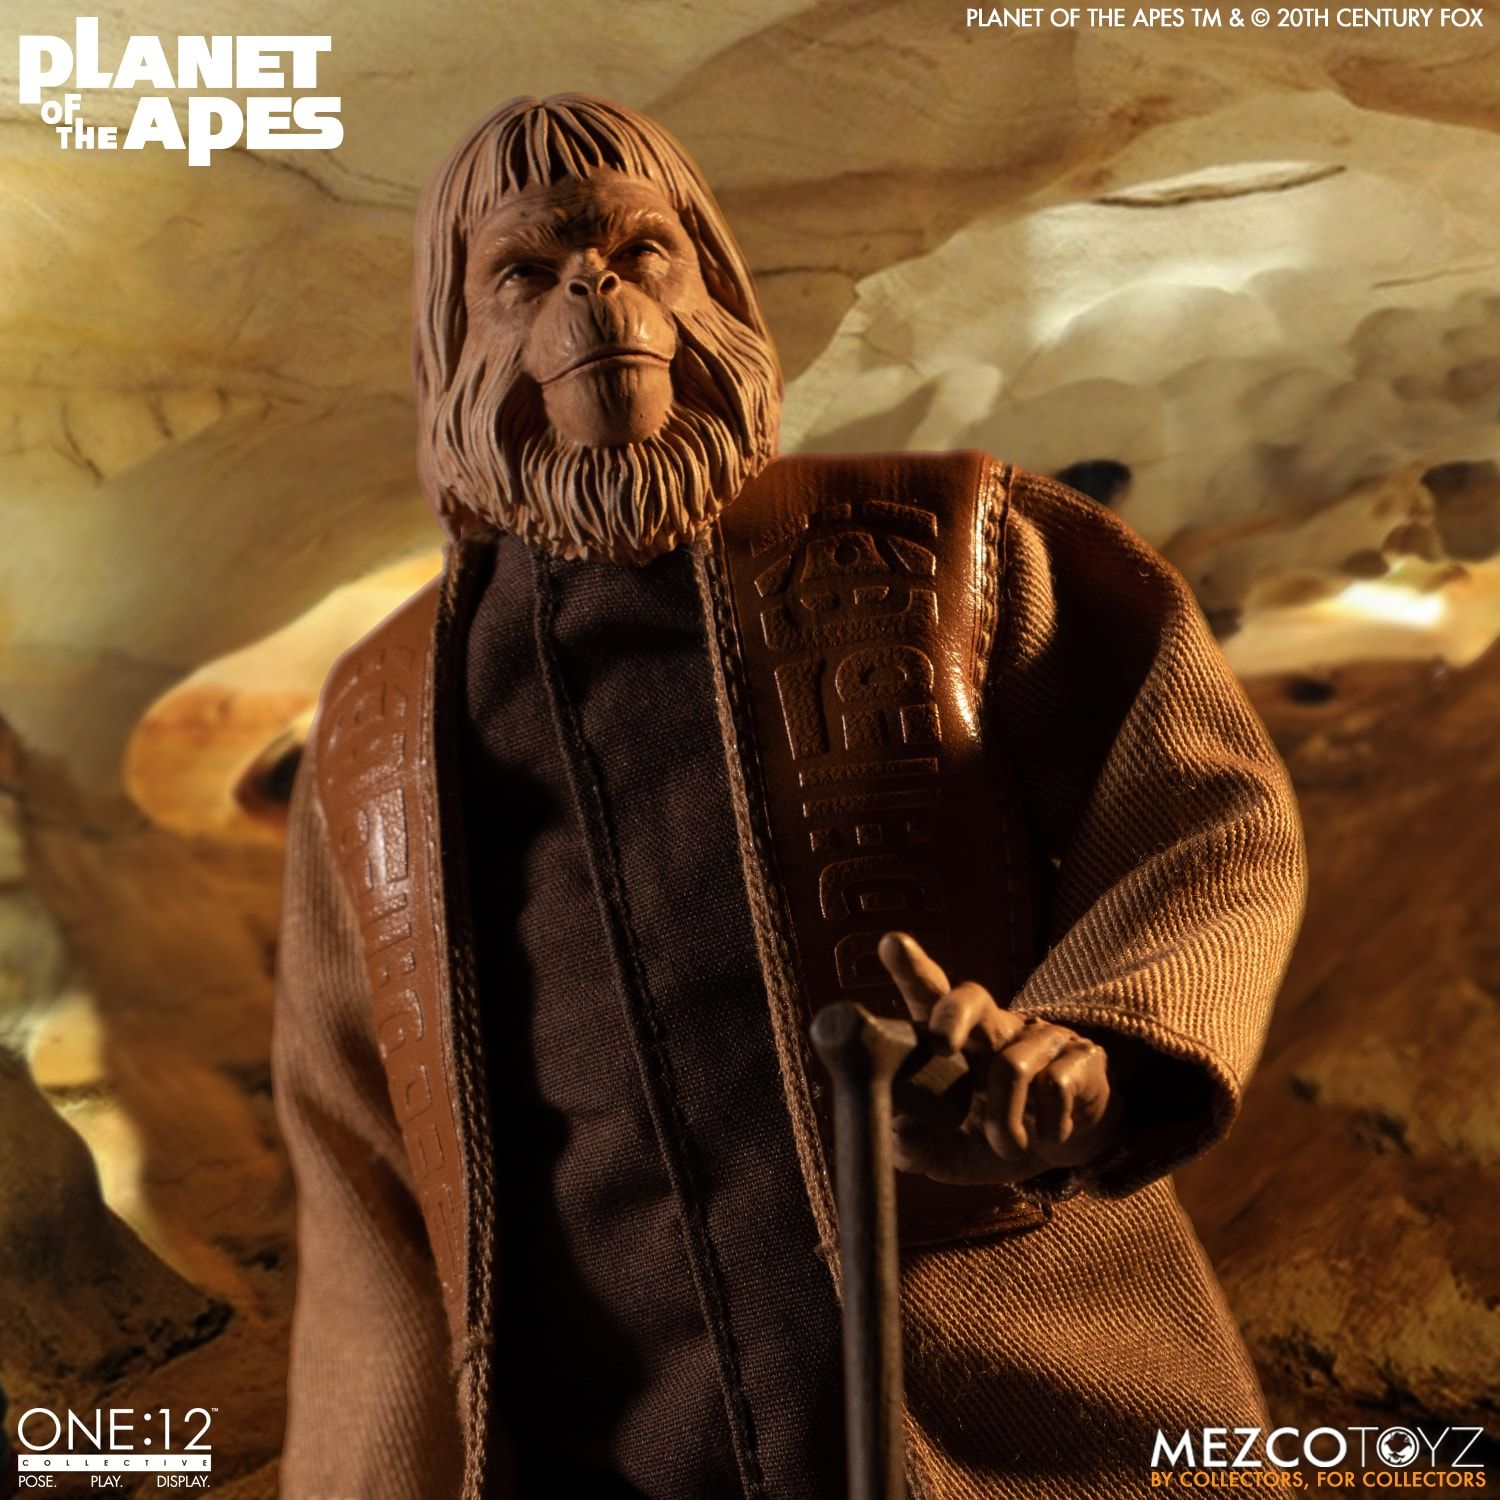 New Product: Mezco Planet of the Apes Dr. Zaius 8349